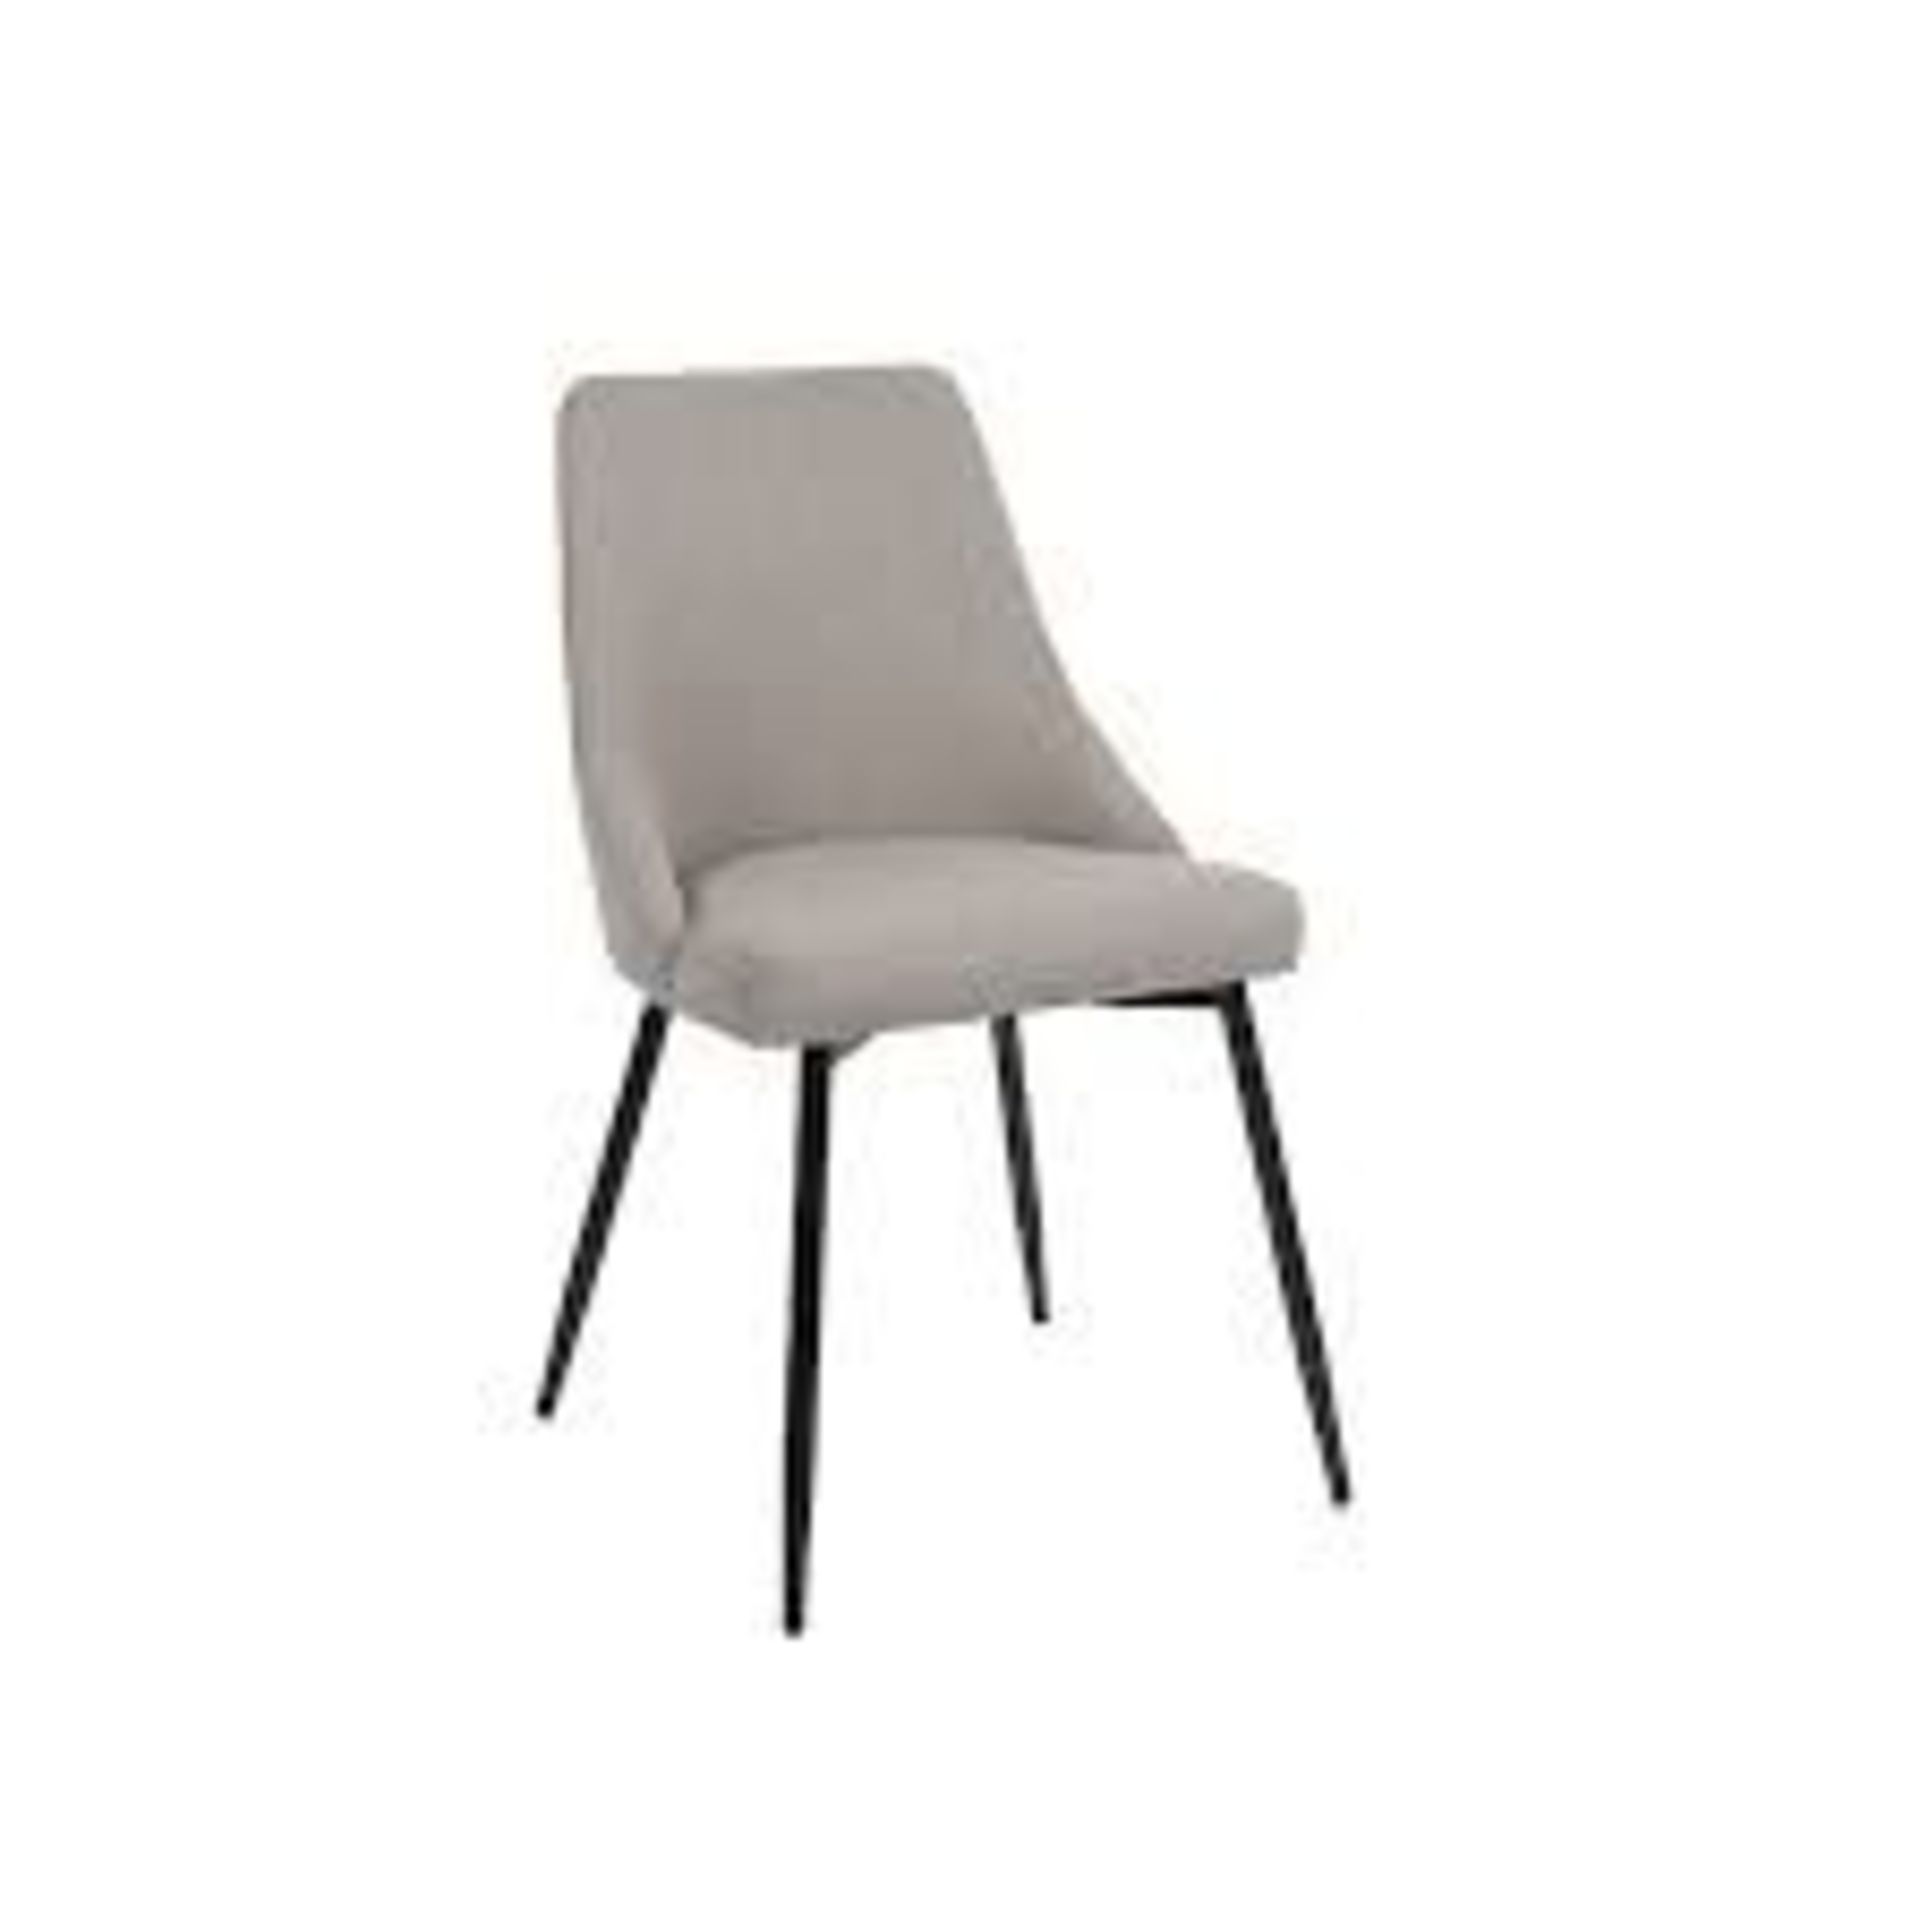 Boldo Grey Chair (H)865mm (W)520mm (D)560mm, Pack of 2. - R9BW.